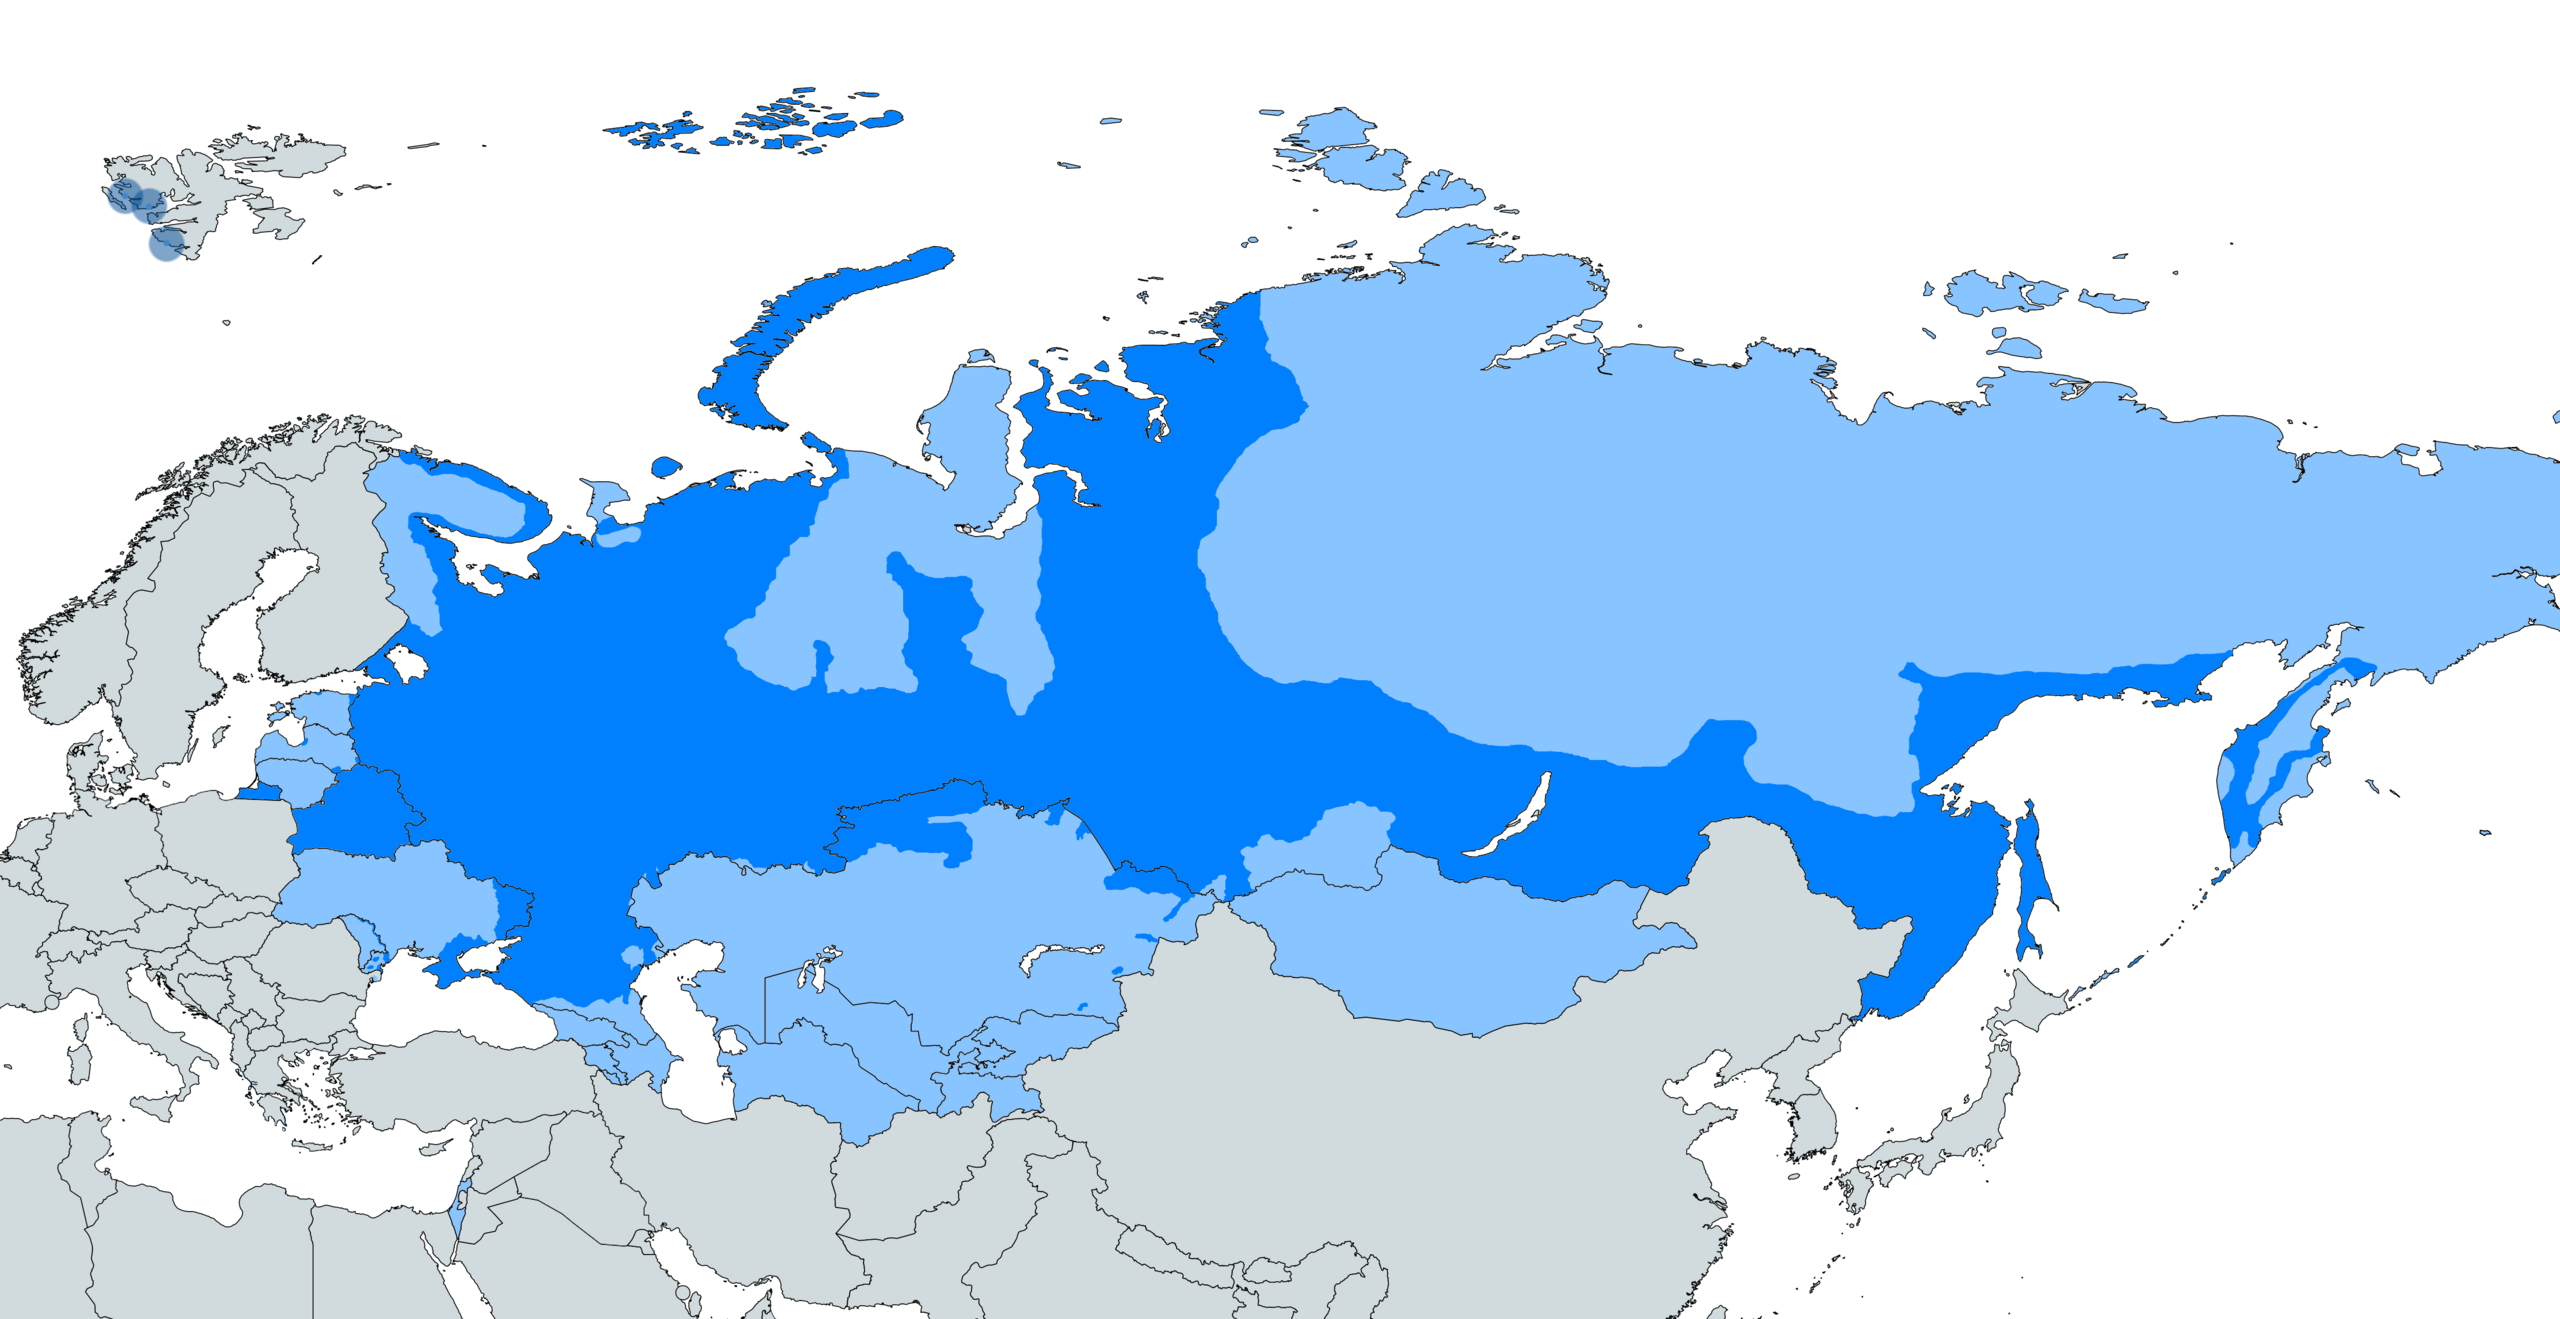 File:Russian language map pt.png - Wikimedia Commons